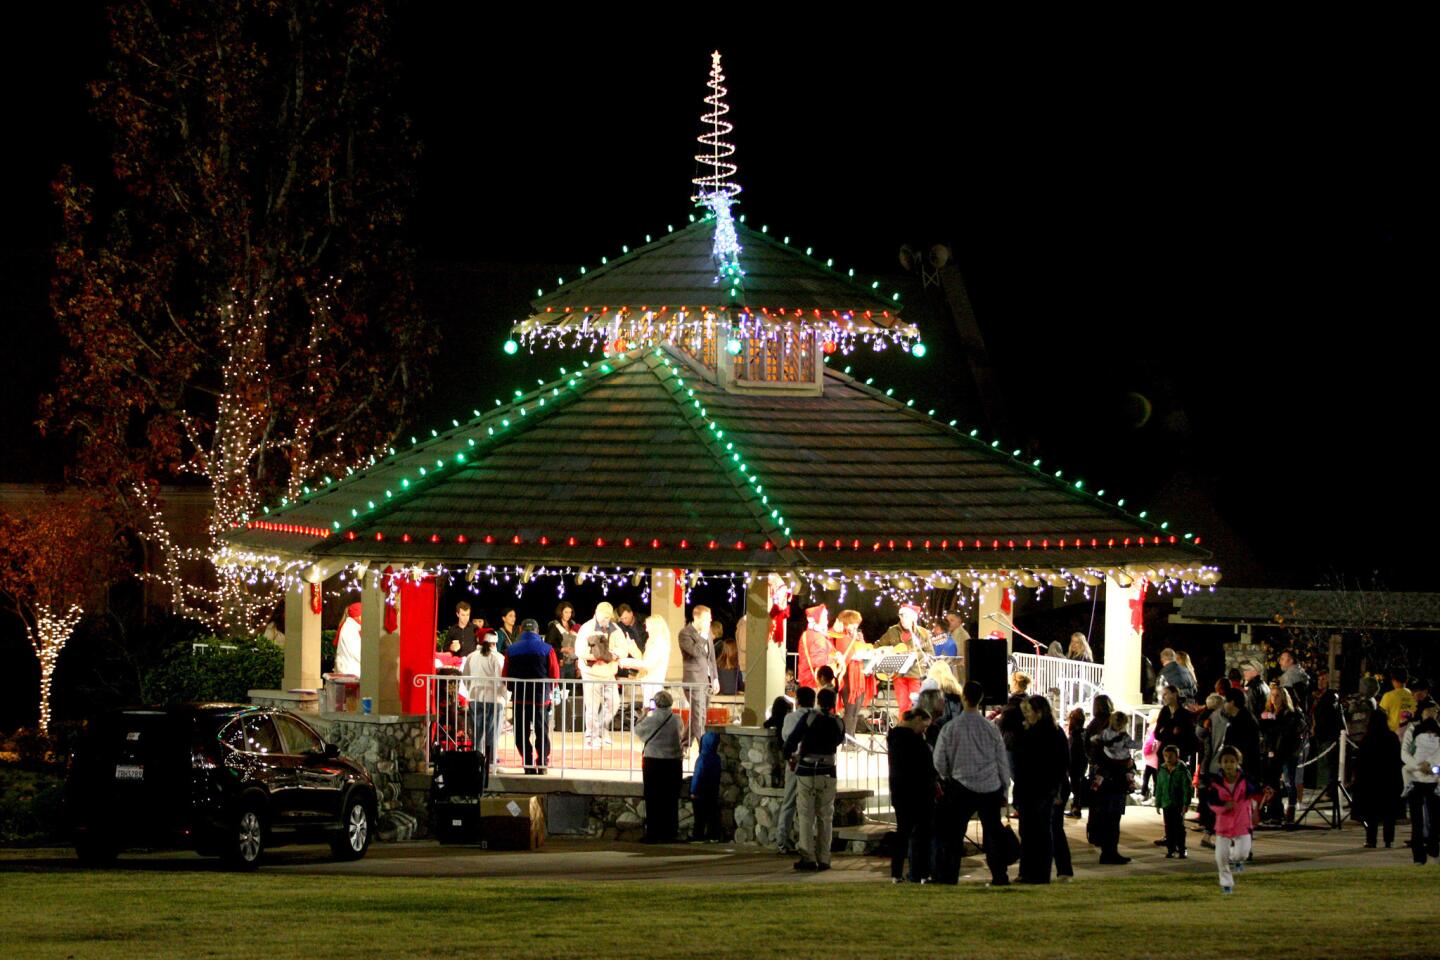 The lights on the gazebo were switched on by Santa Claus during the 21st Festival in Lights at Memorial Park in La Cañada Flintridge on Friday, Dec. 4, 2015.